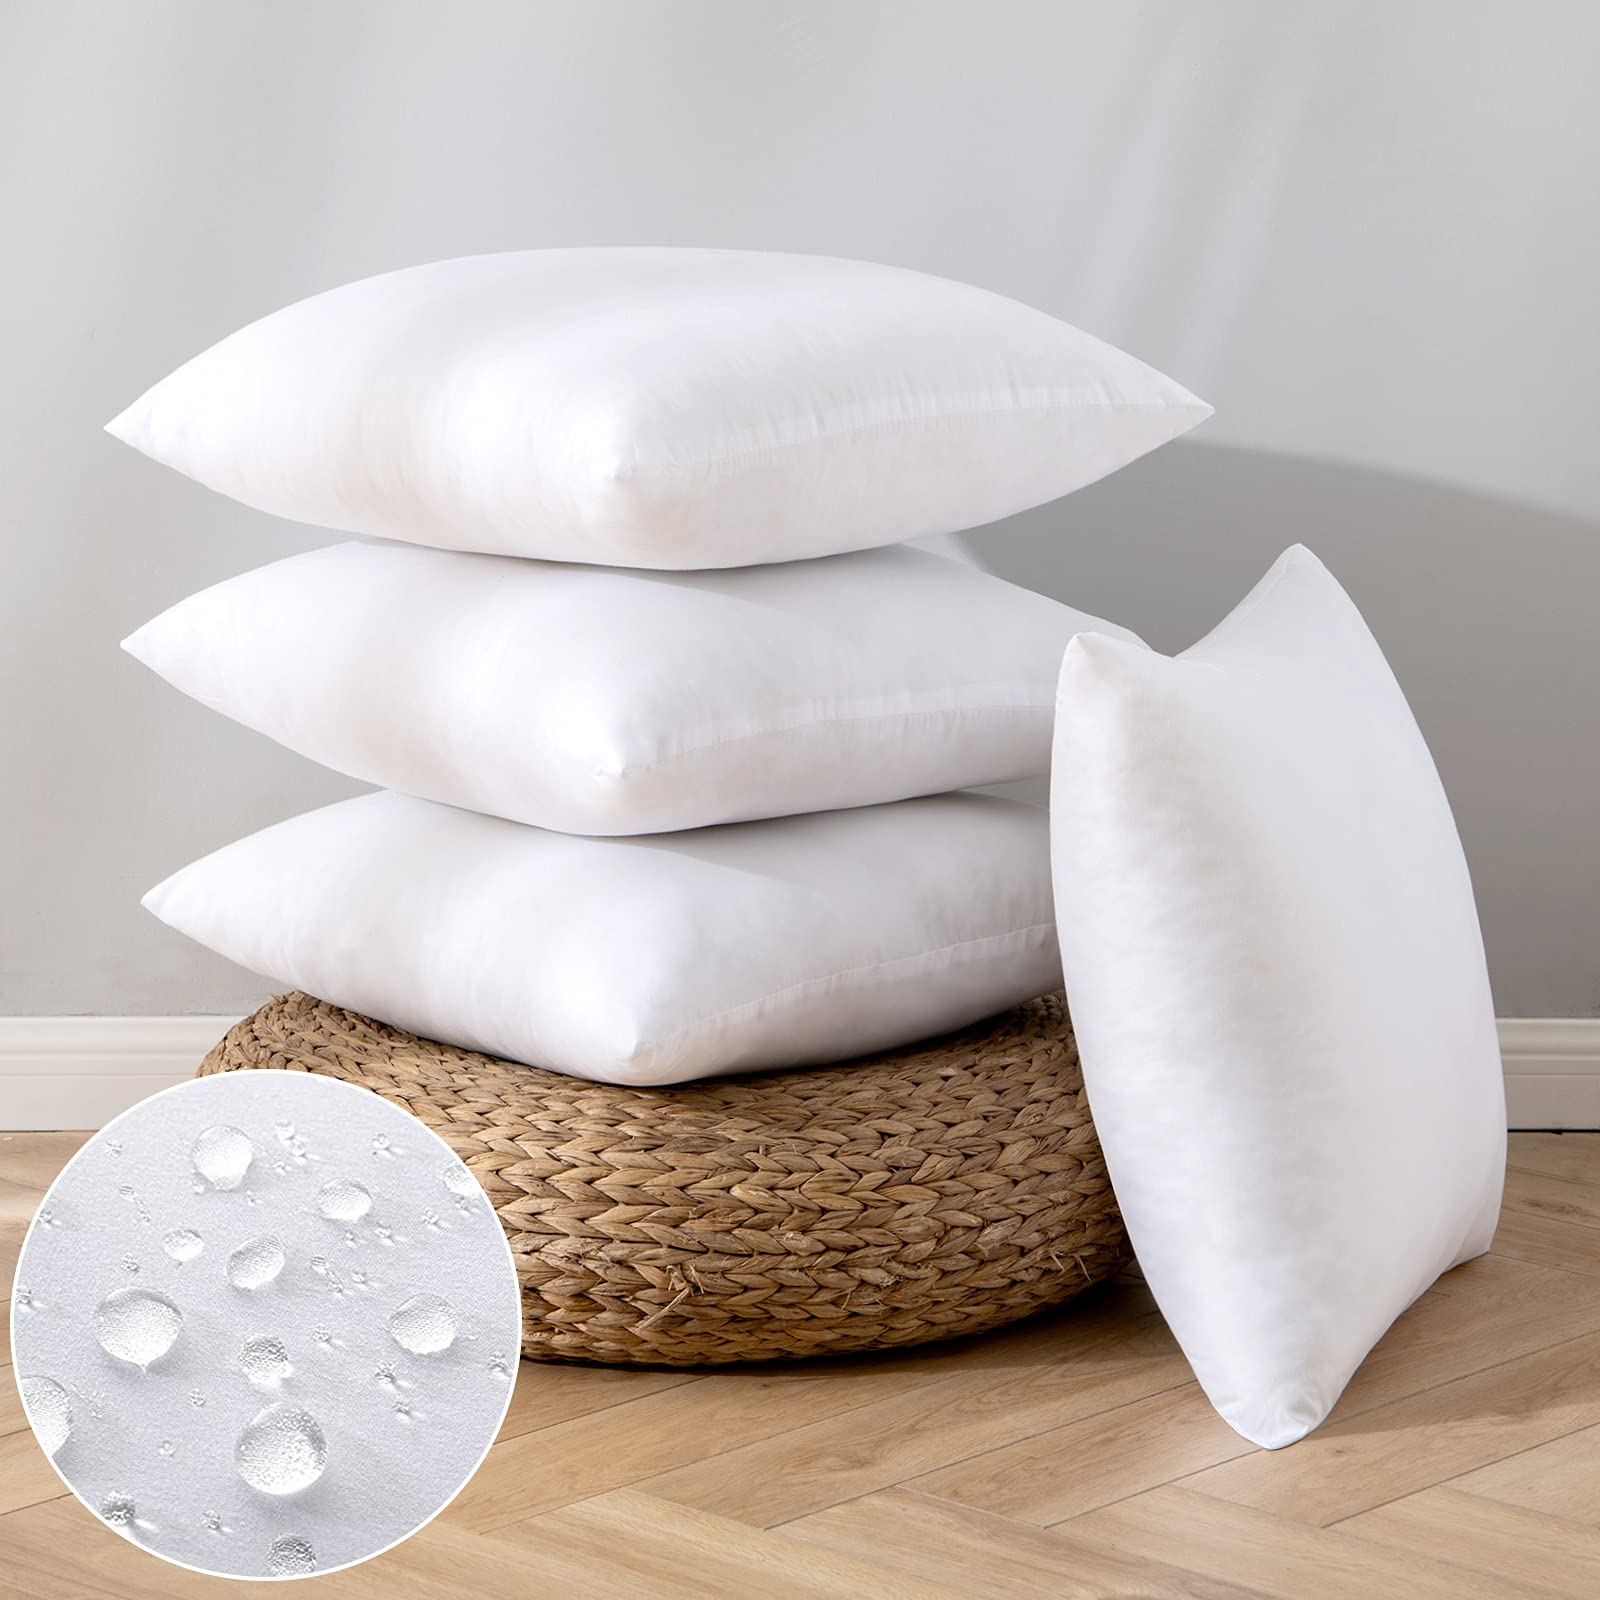 EMEMA Cushion Insert 20x20 Inch Square Pillow Inner Accessories Set of 4 for Sofa Bed Cushion Cover Pillow 50x50 cm White Warm Decorative